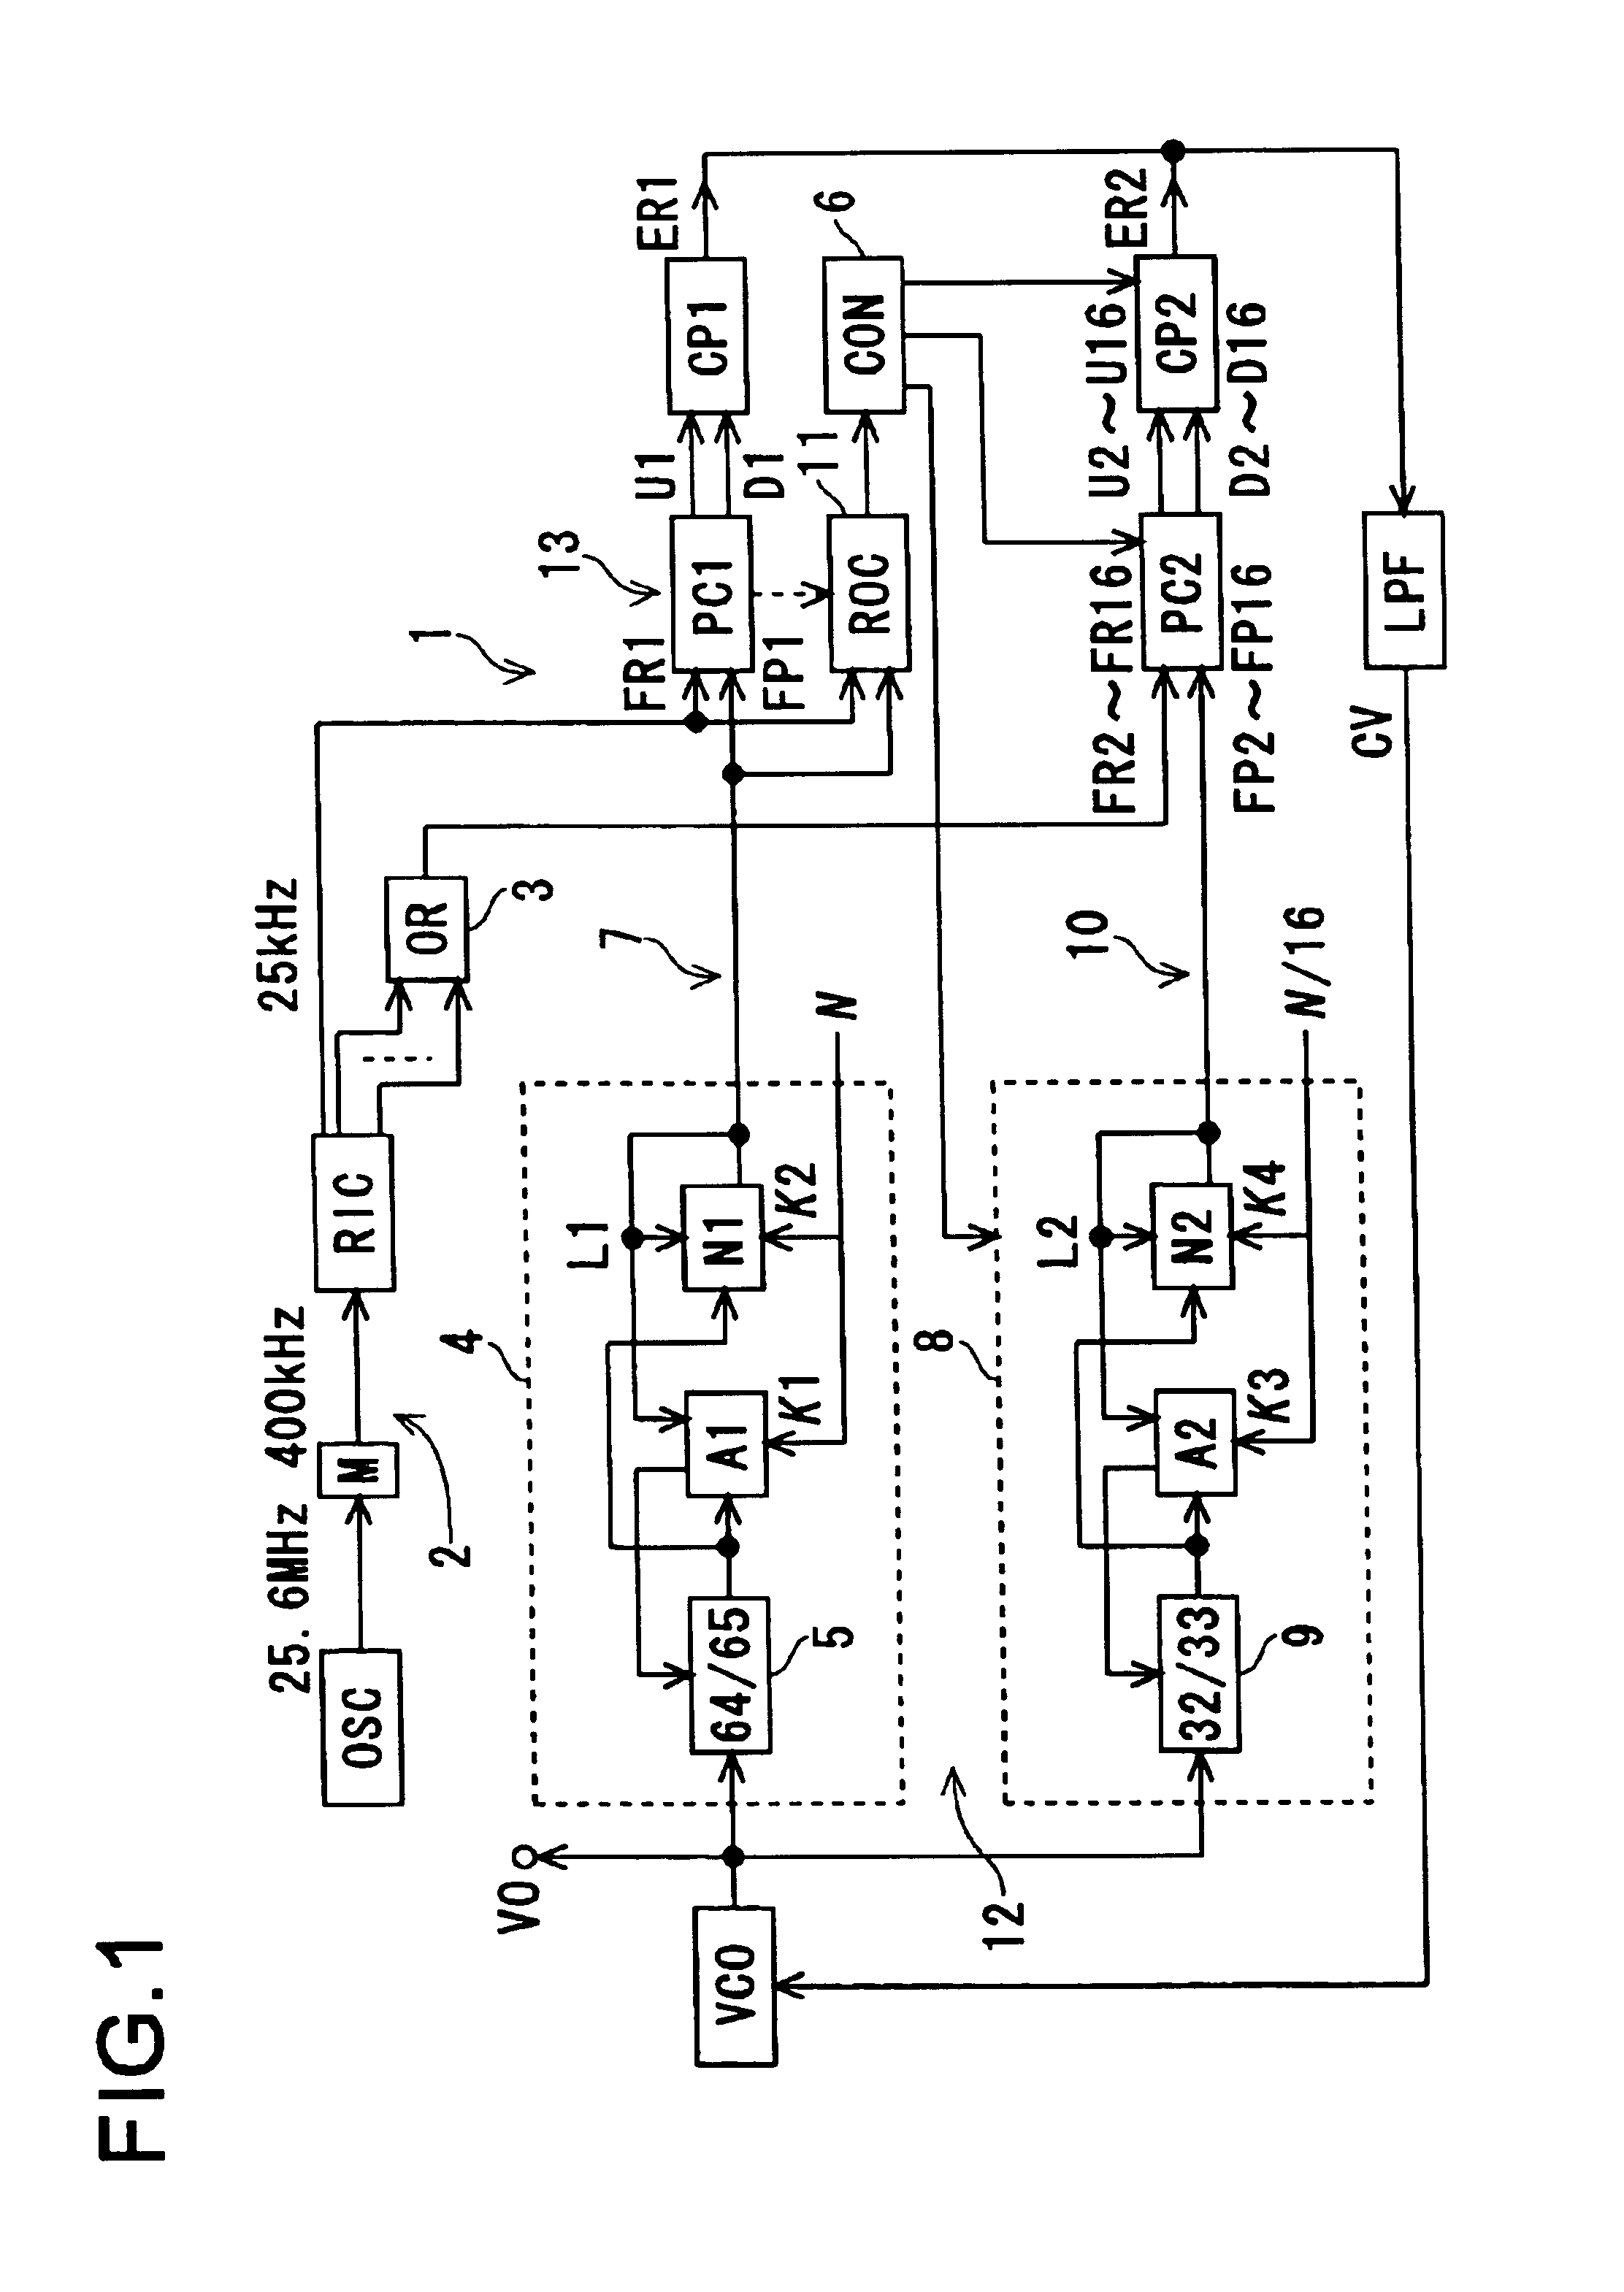 Phase locked loop circuit with selectable variable frequency dividers